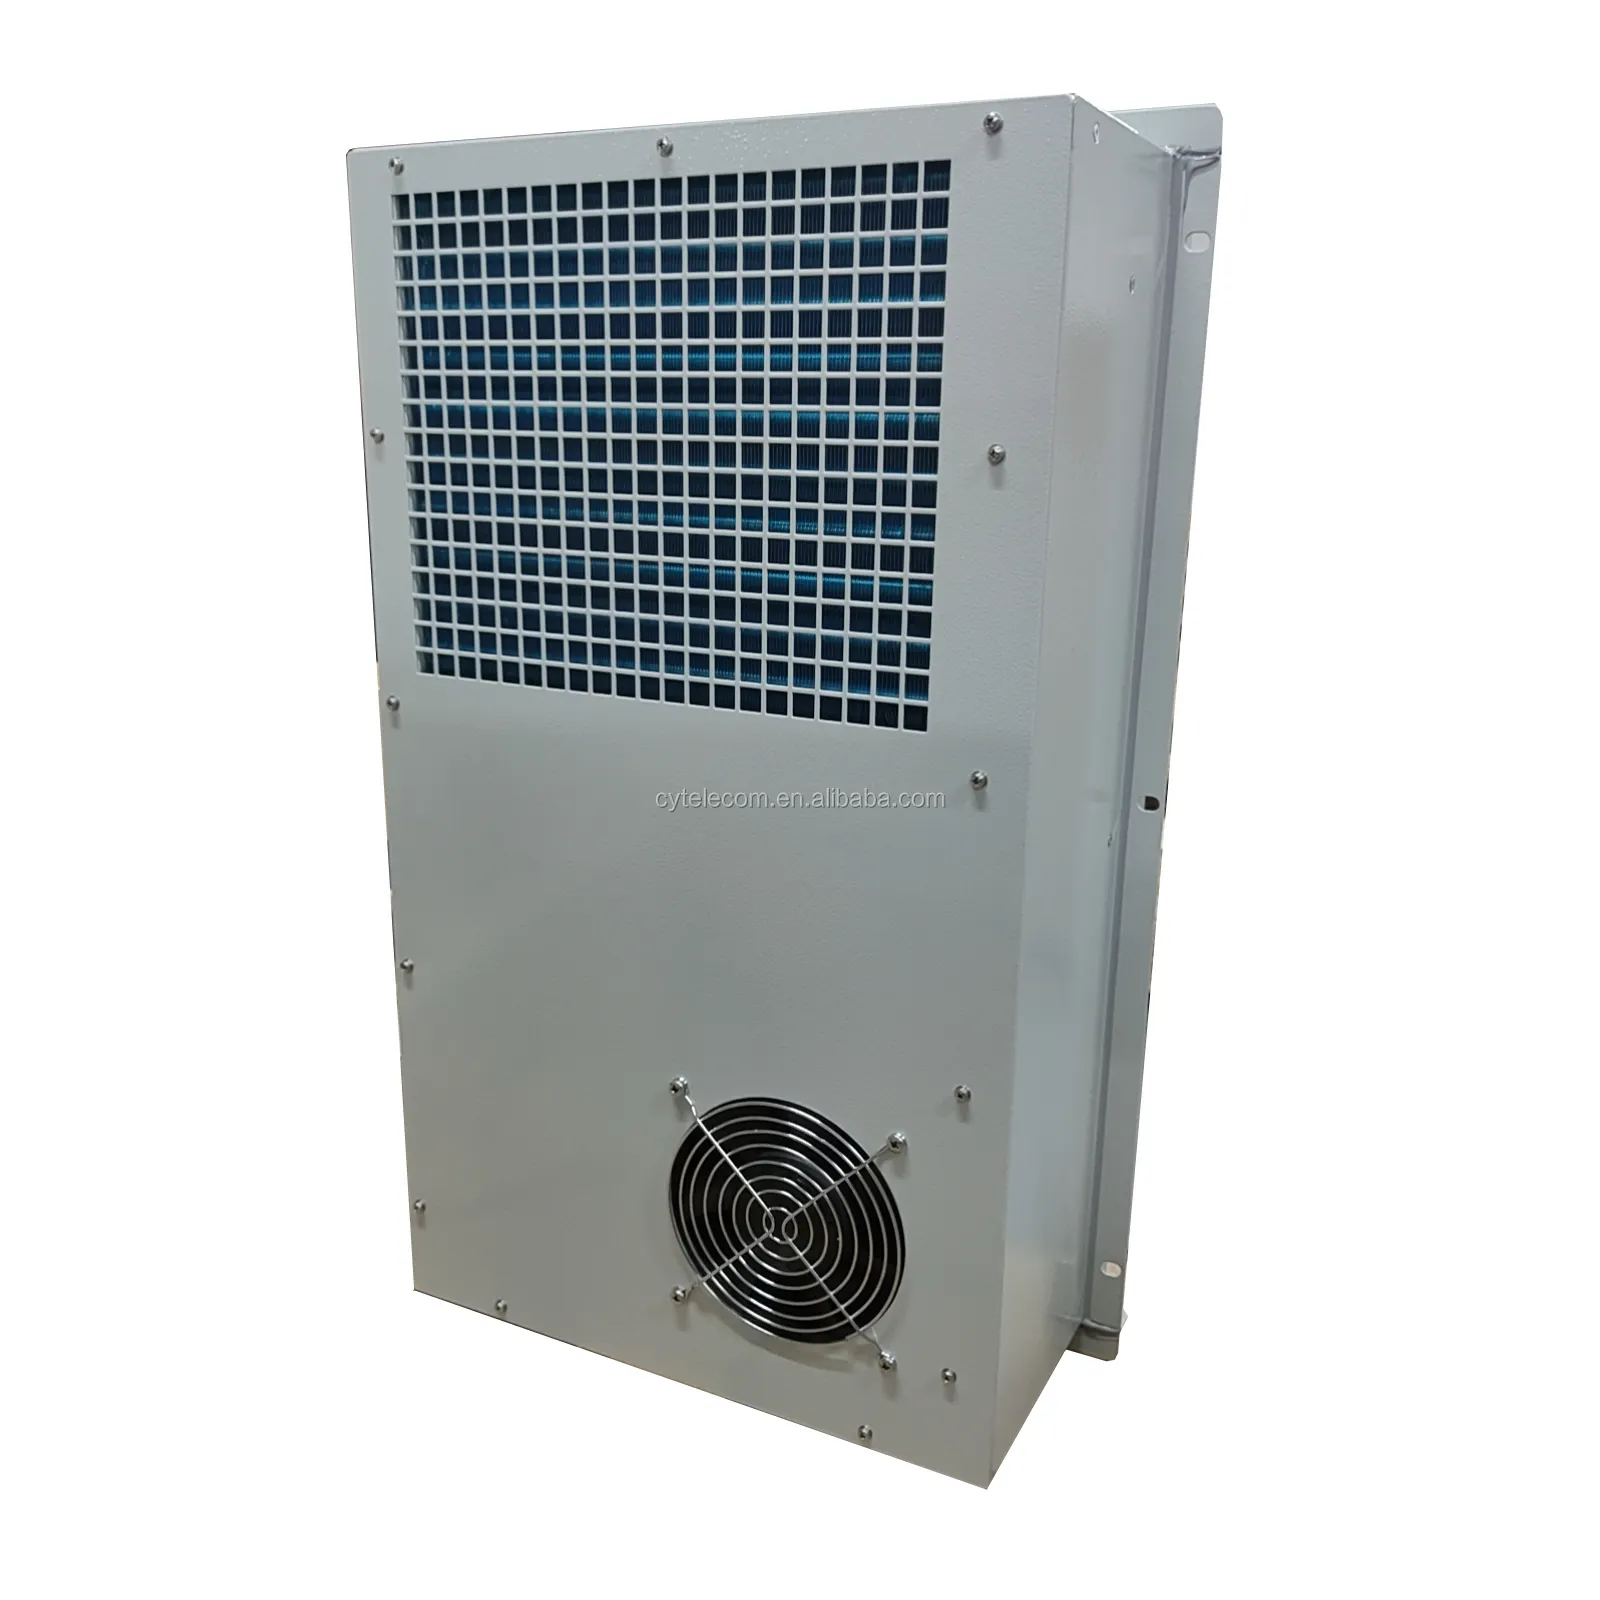 Server Rack Cooling Air Conditioner 230VAC 2000W for Industrial Telecom cabinet Network Use